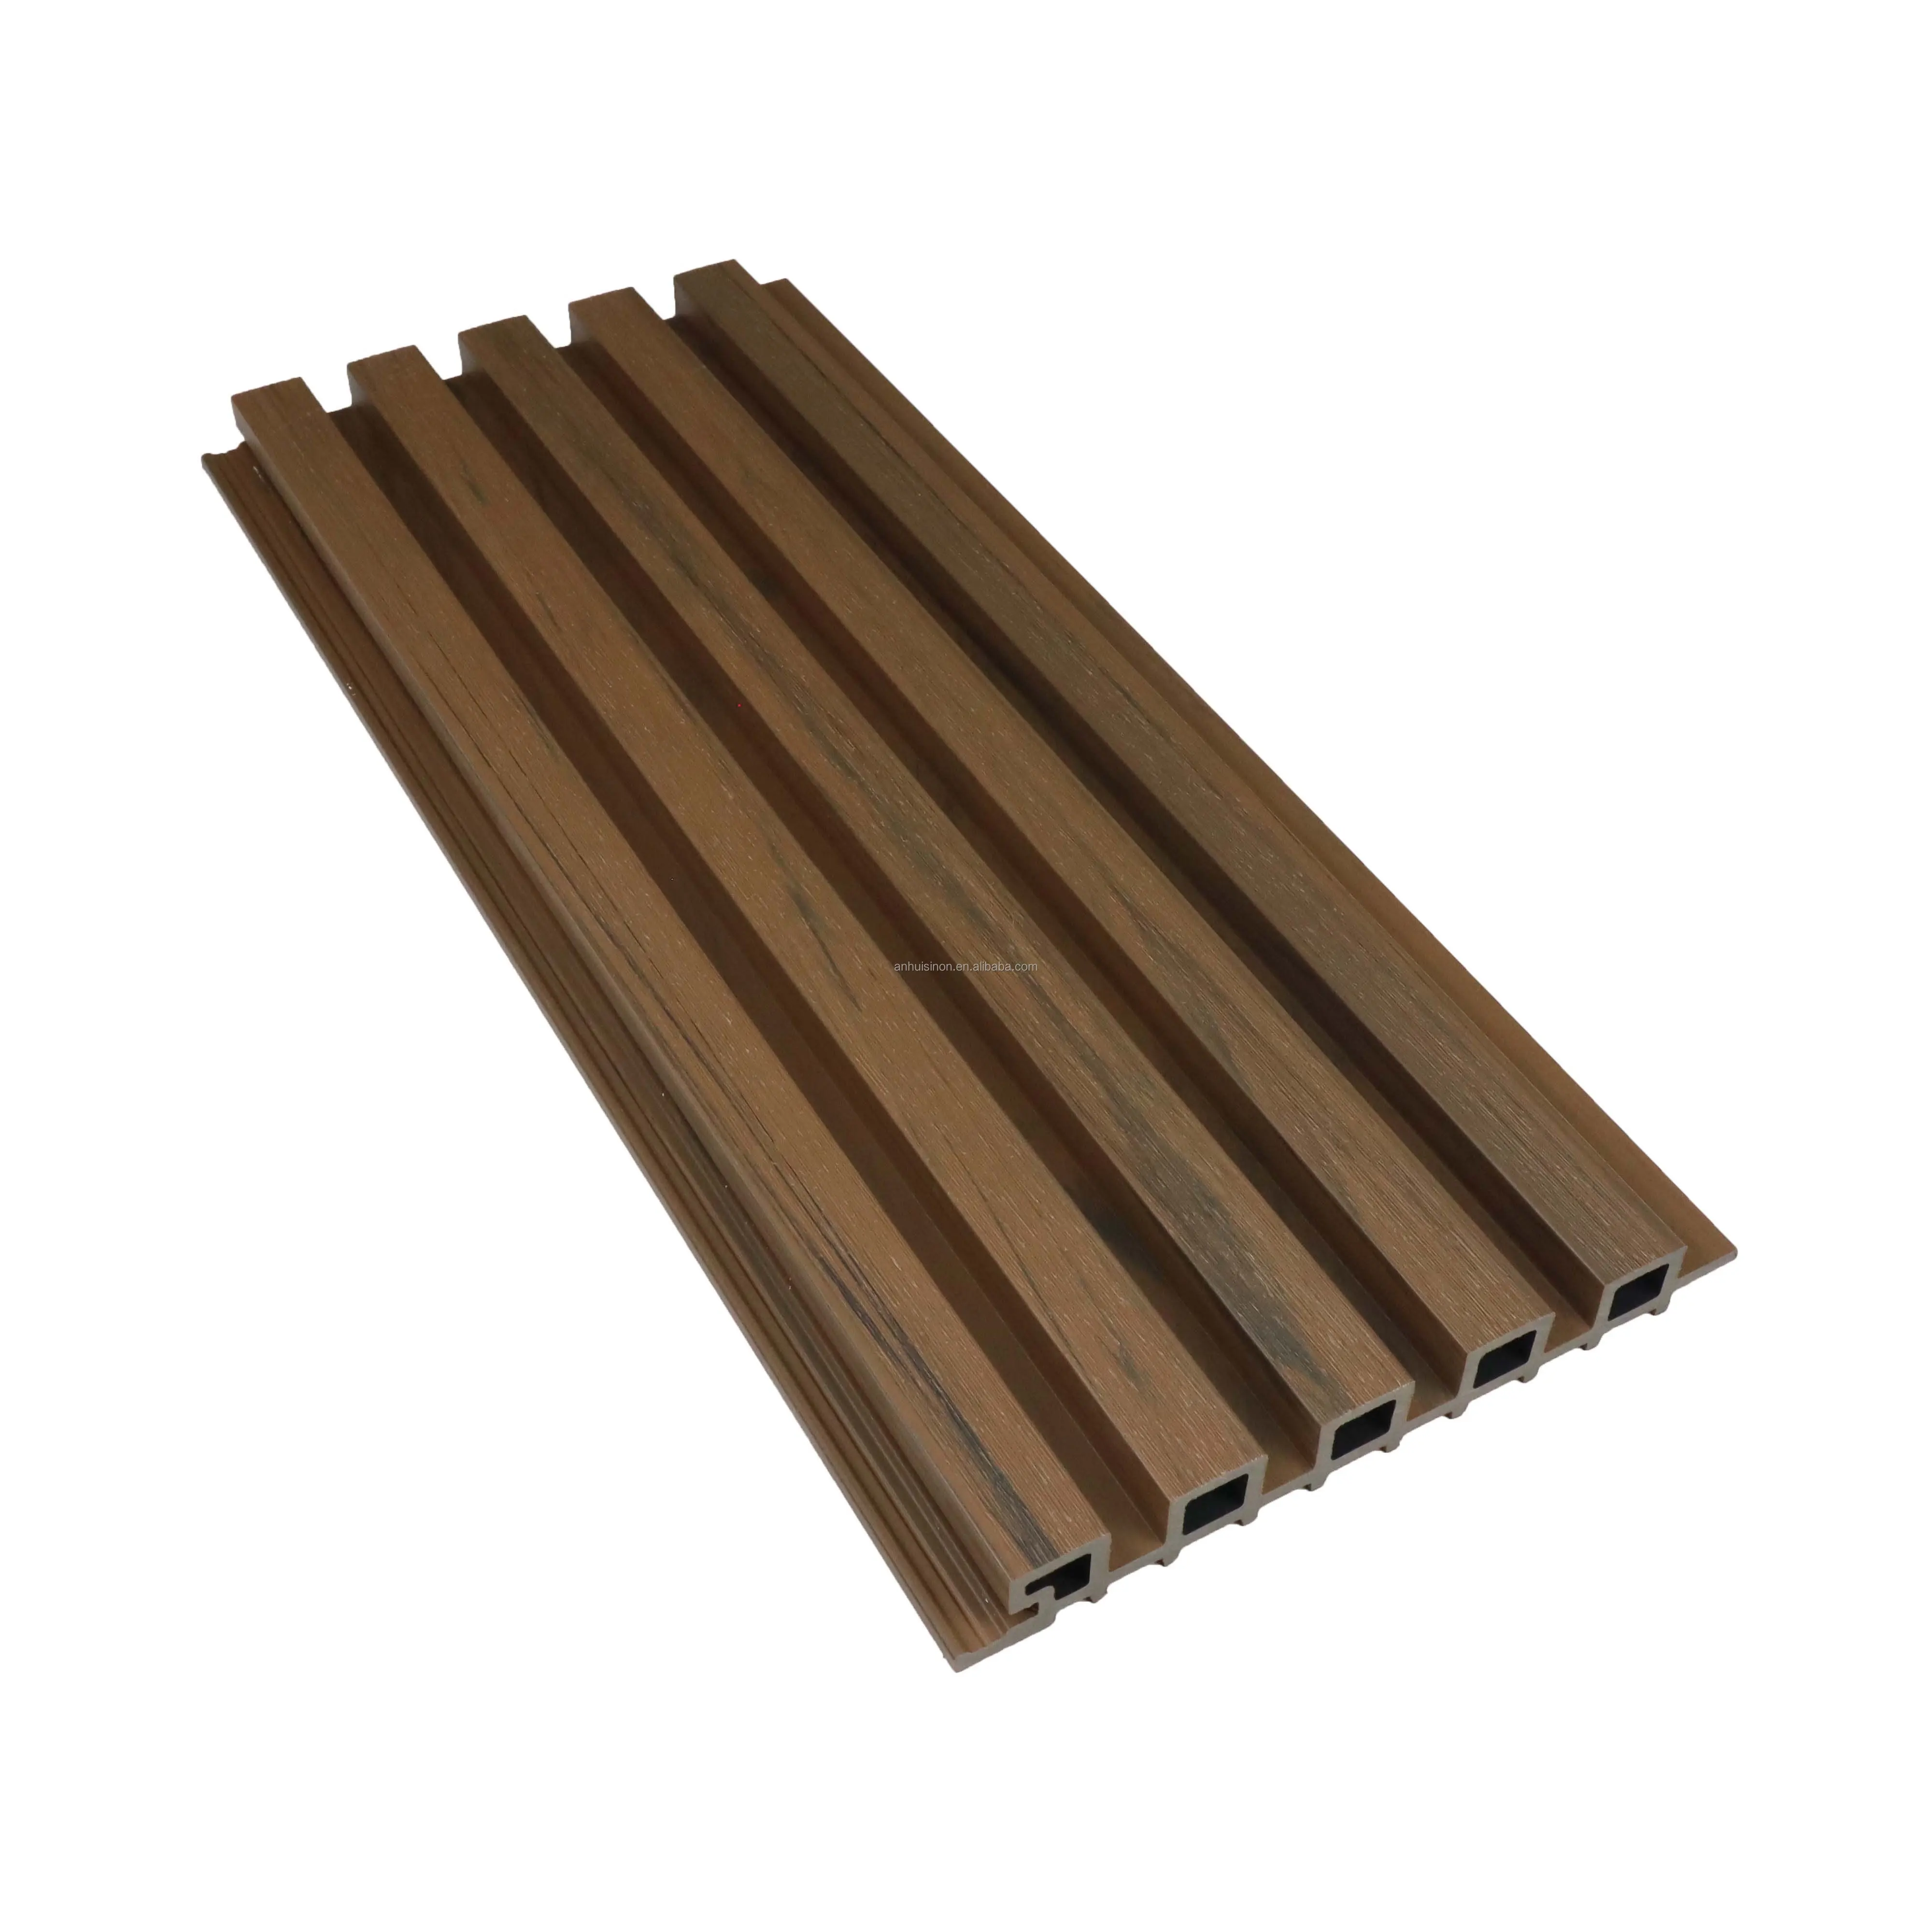 Wpc Exterior Outdoor Decorative Wall Cladding Panel Design Co-extrusion Panel Wooden Siding Board Building House